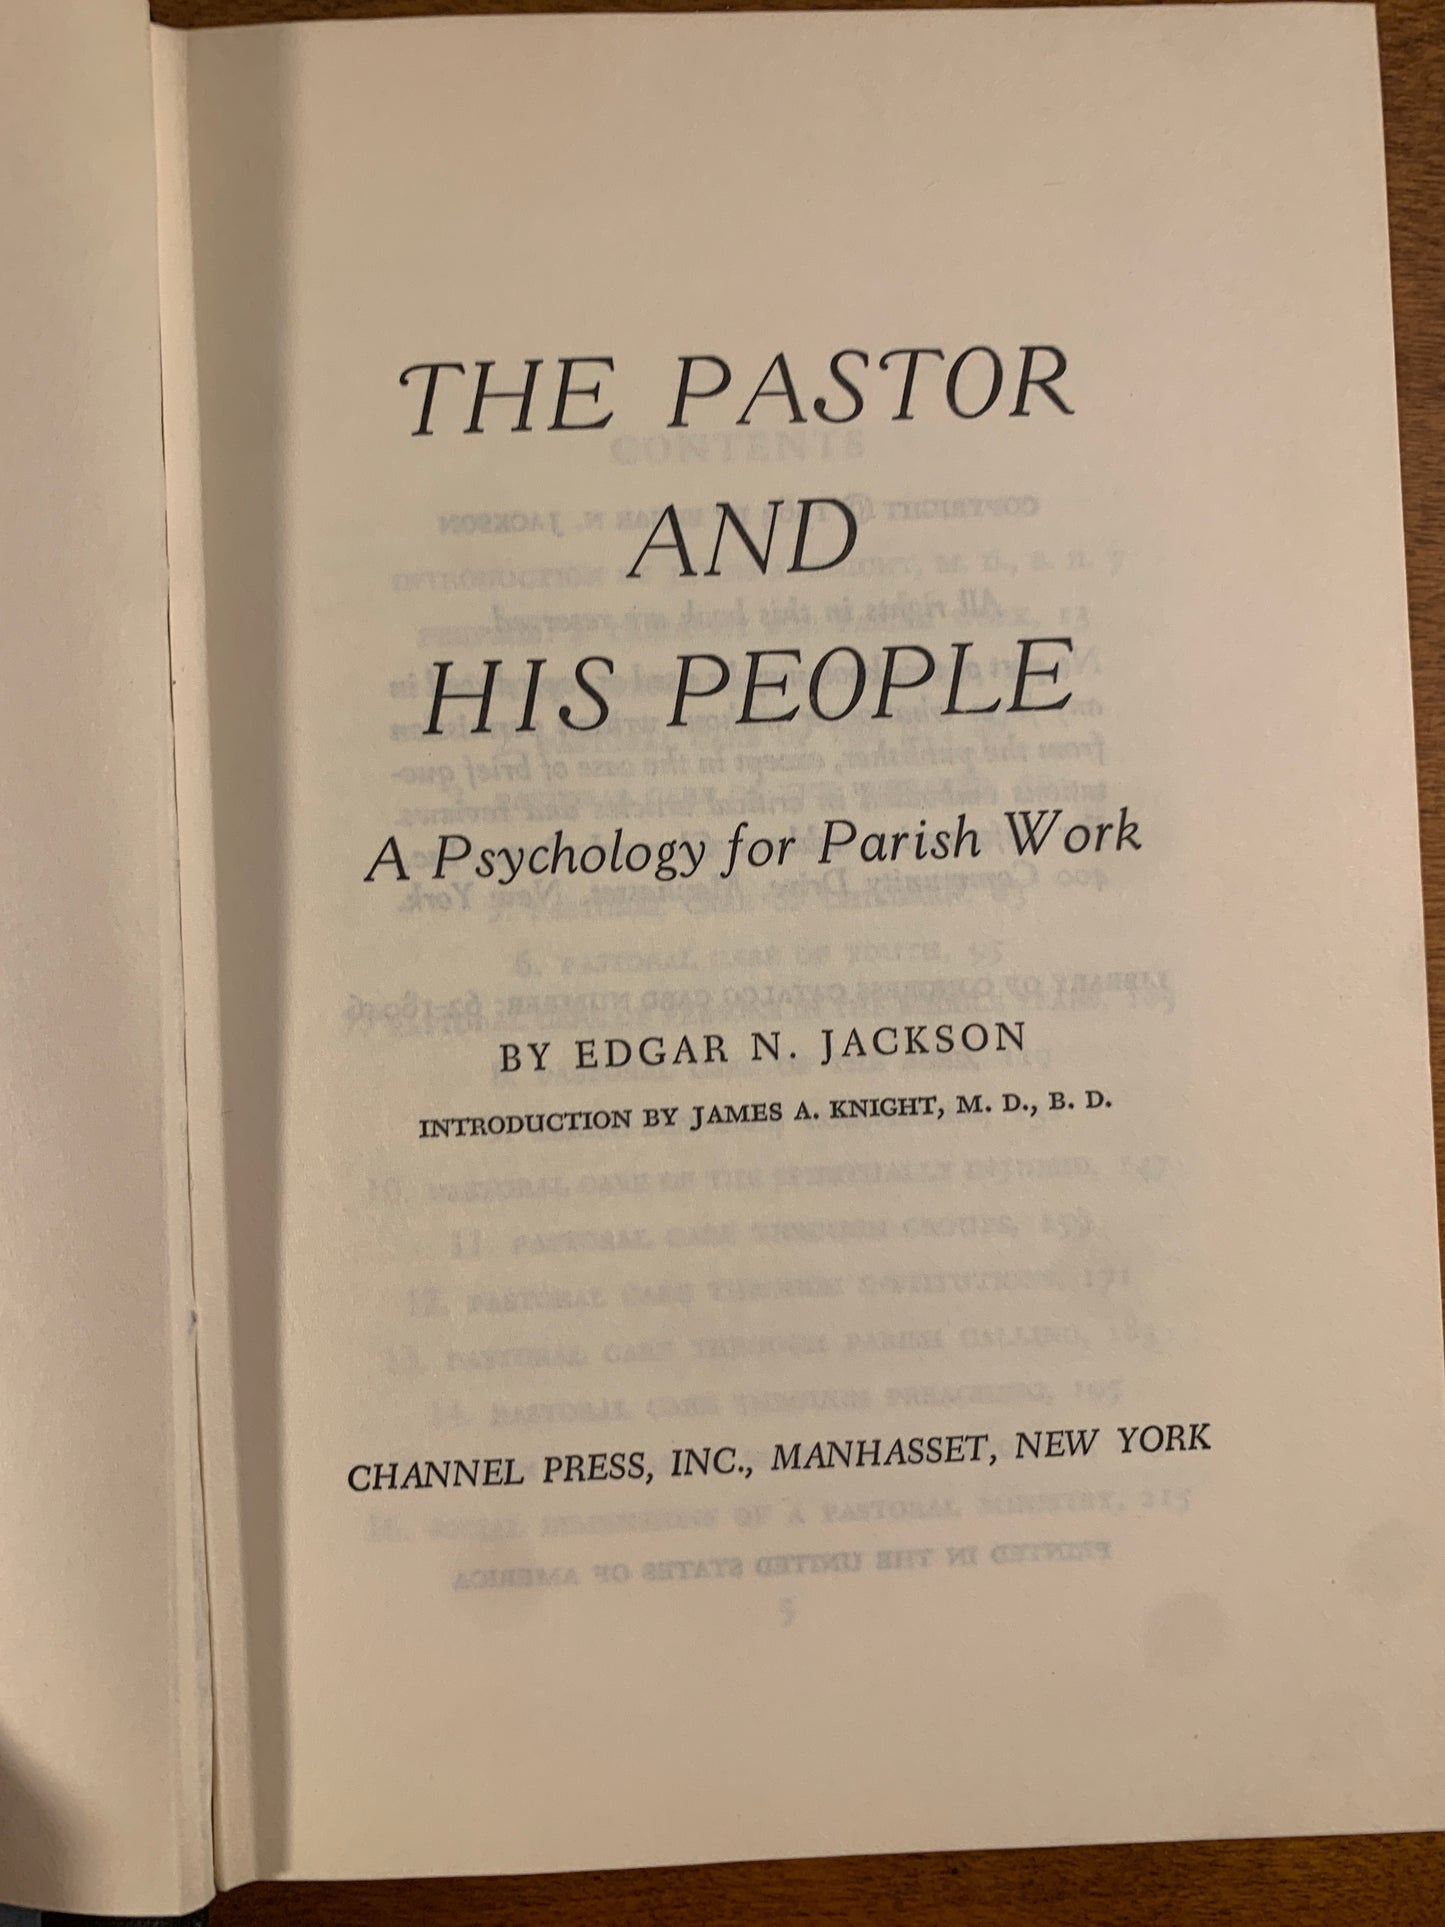 The Pastor and his People by Edgar N. Jackson 1963